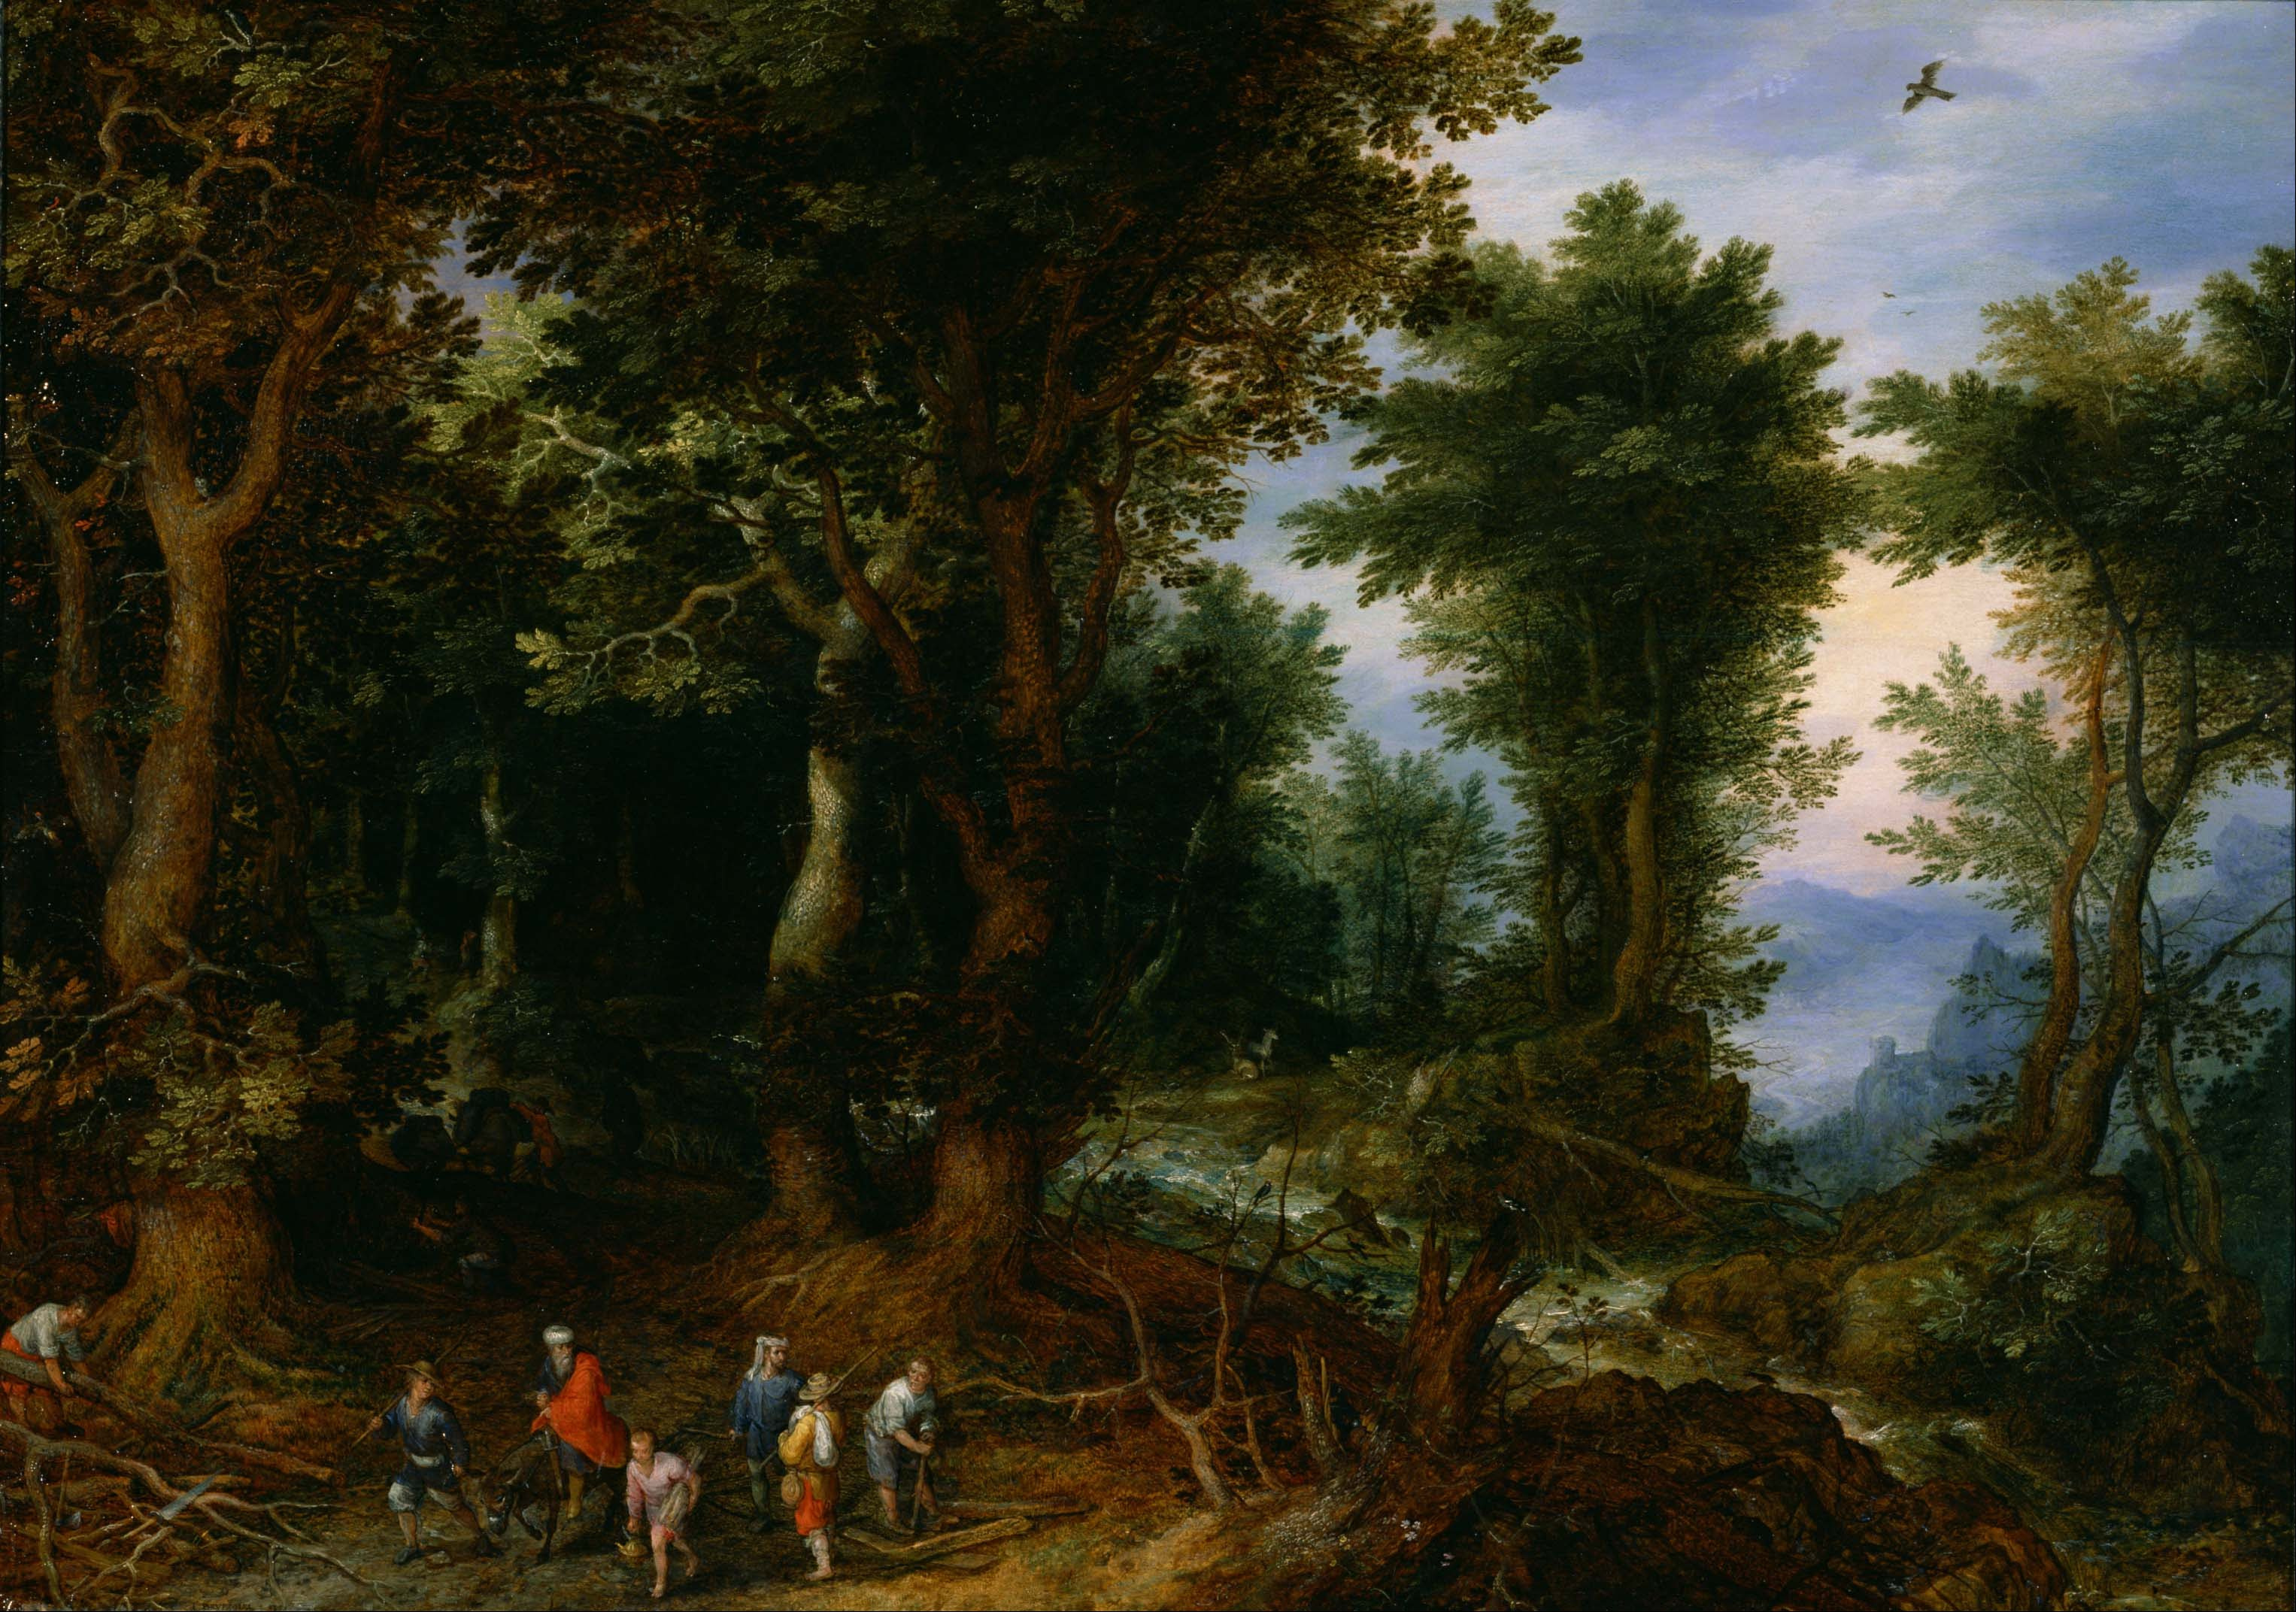 Jan Brueghel, the Elder - Wooded Landscape with Abraham and Isaac - Google Art Project